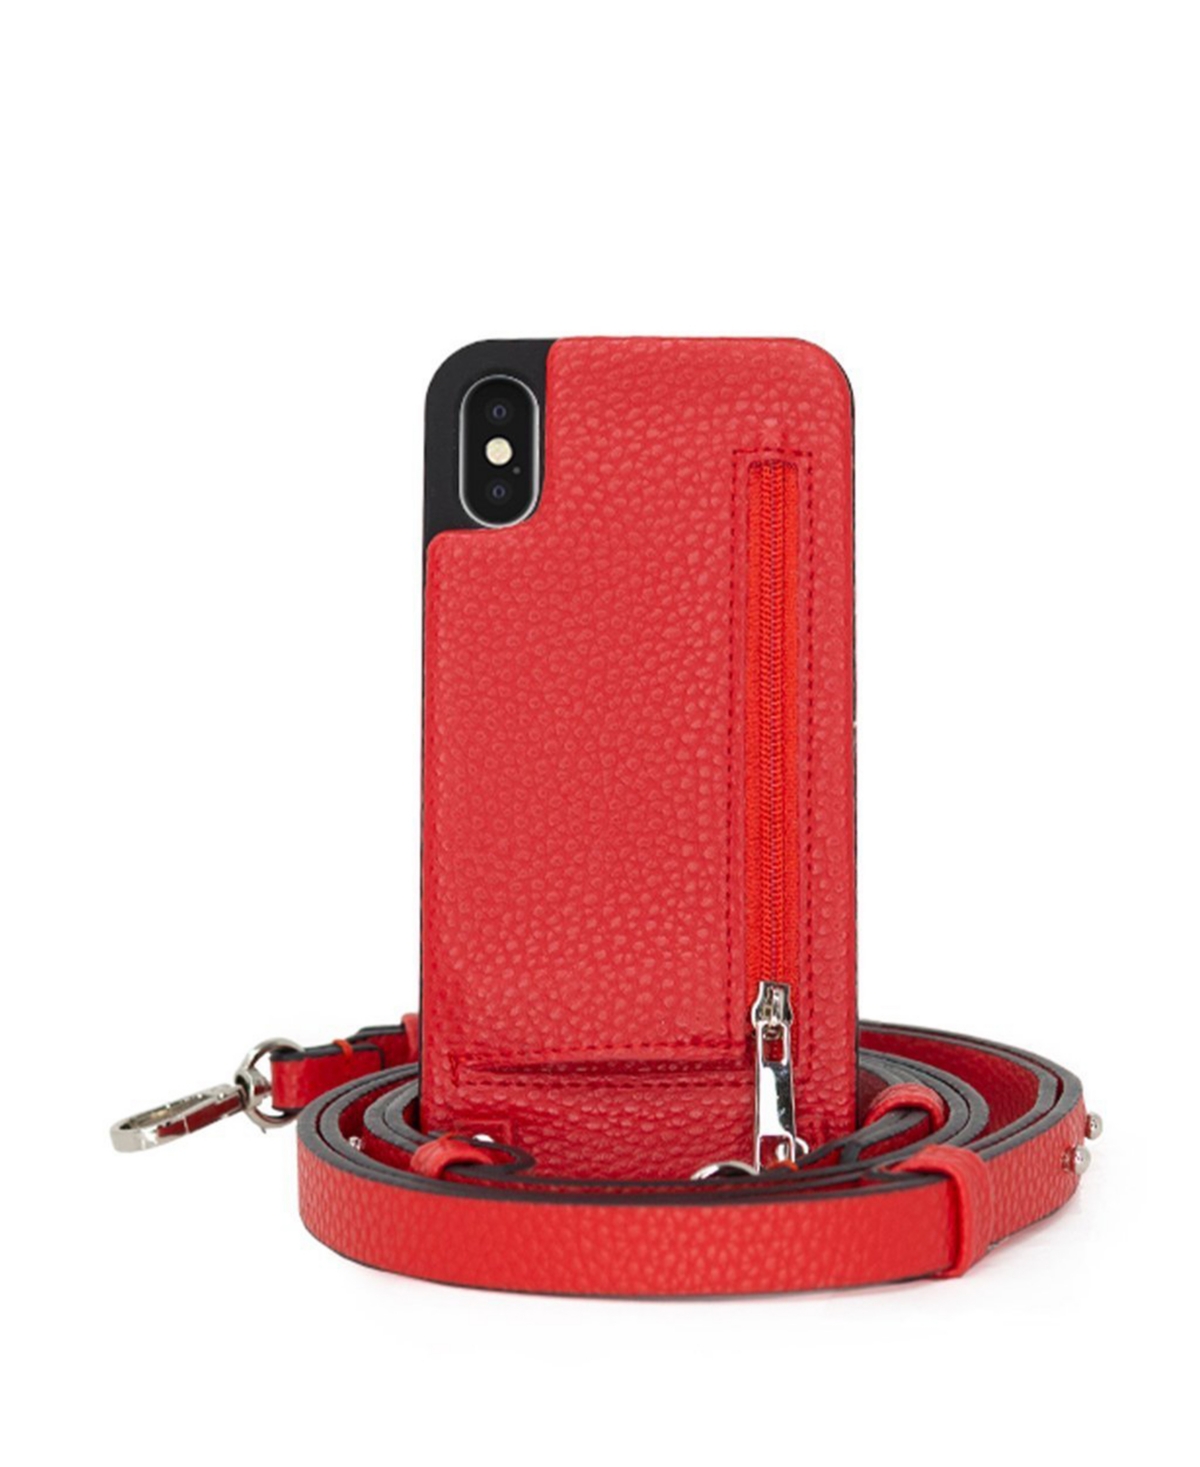 Crossbody Xs Max IPhone Case with Strap Wallet - Red